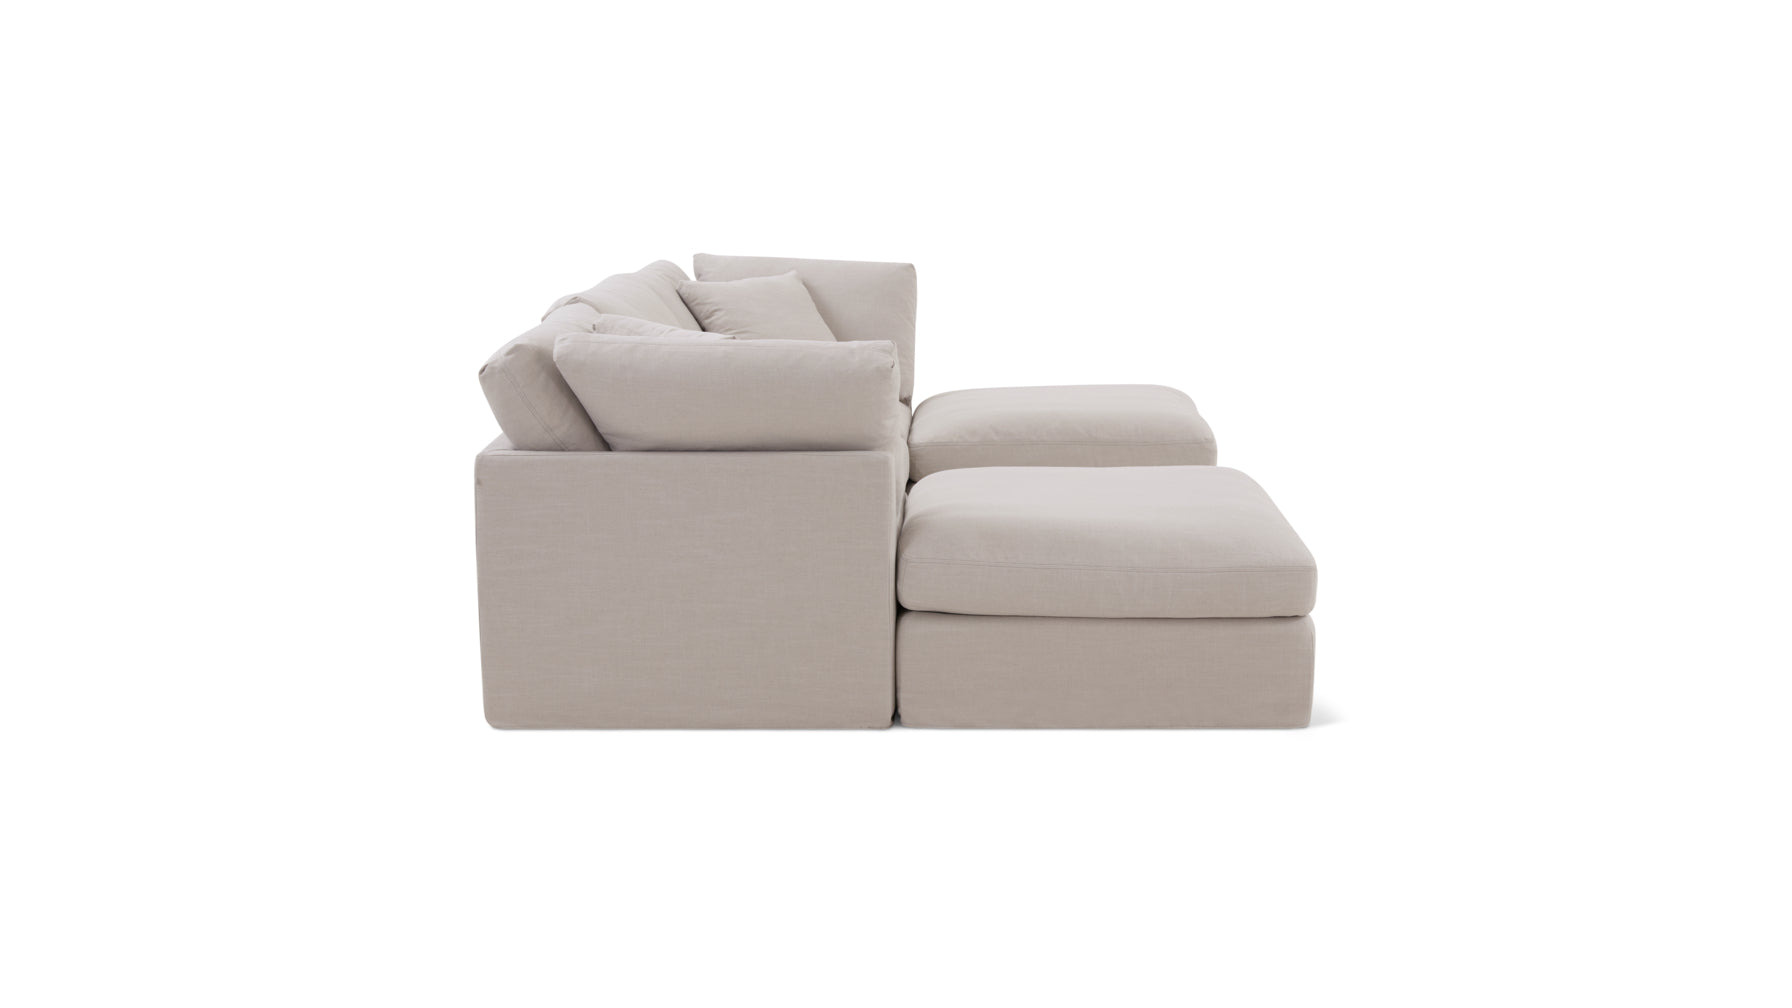 Get Together™ 5-Piece Modular U-Shaped Sectional, Standard, Clay - Image 5